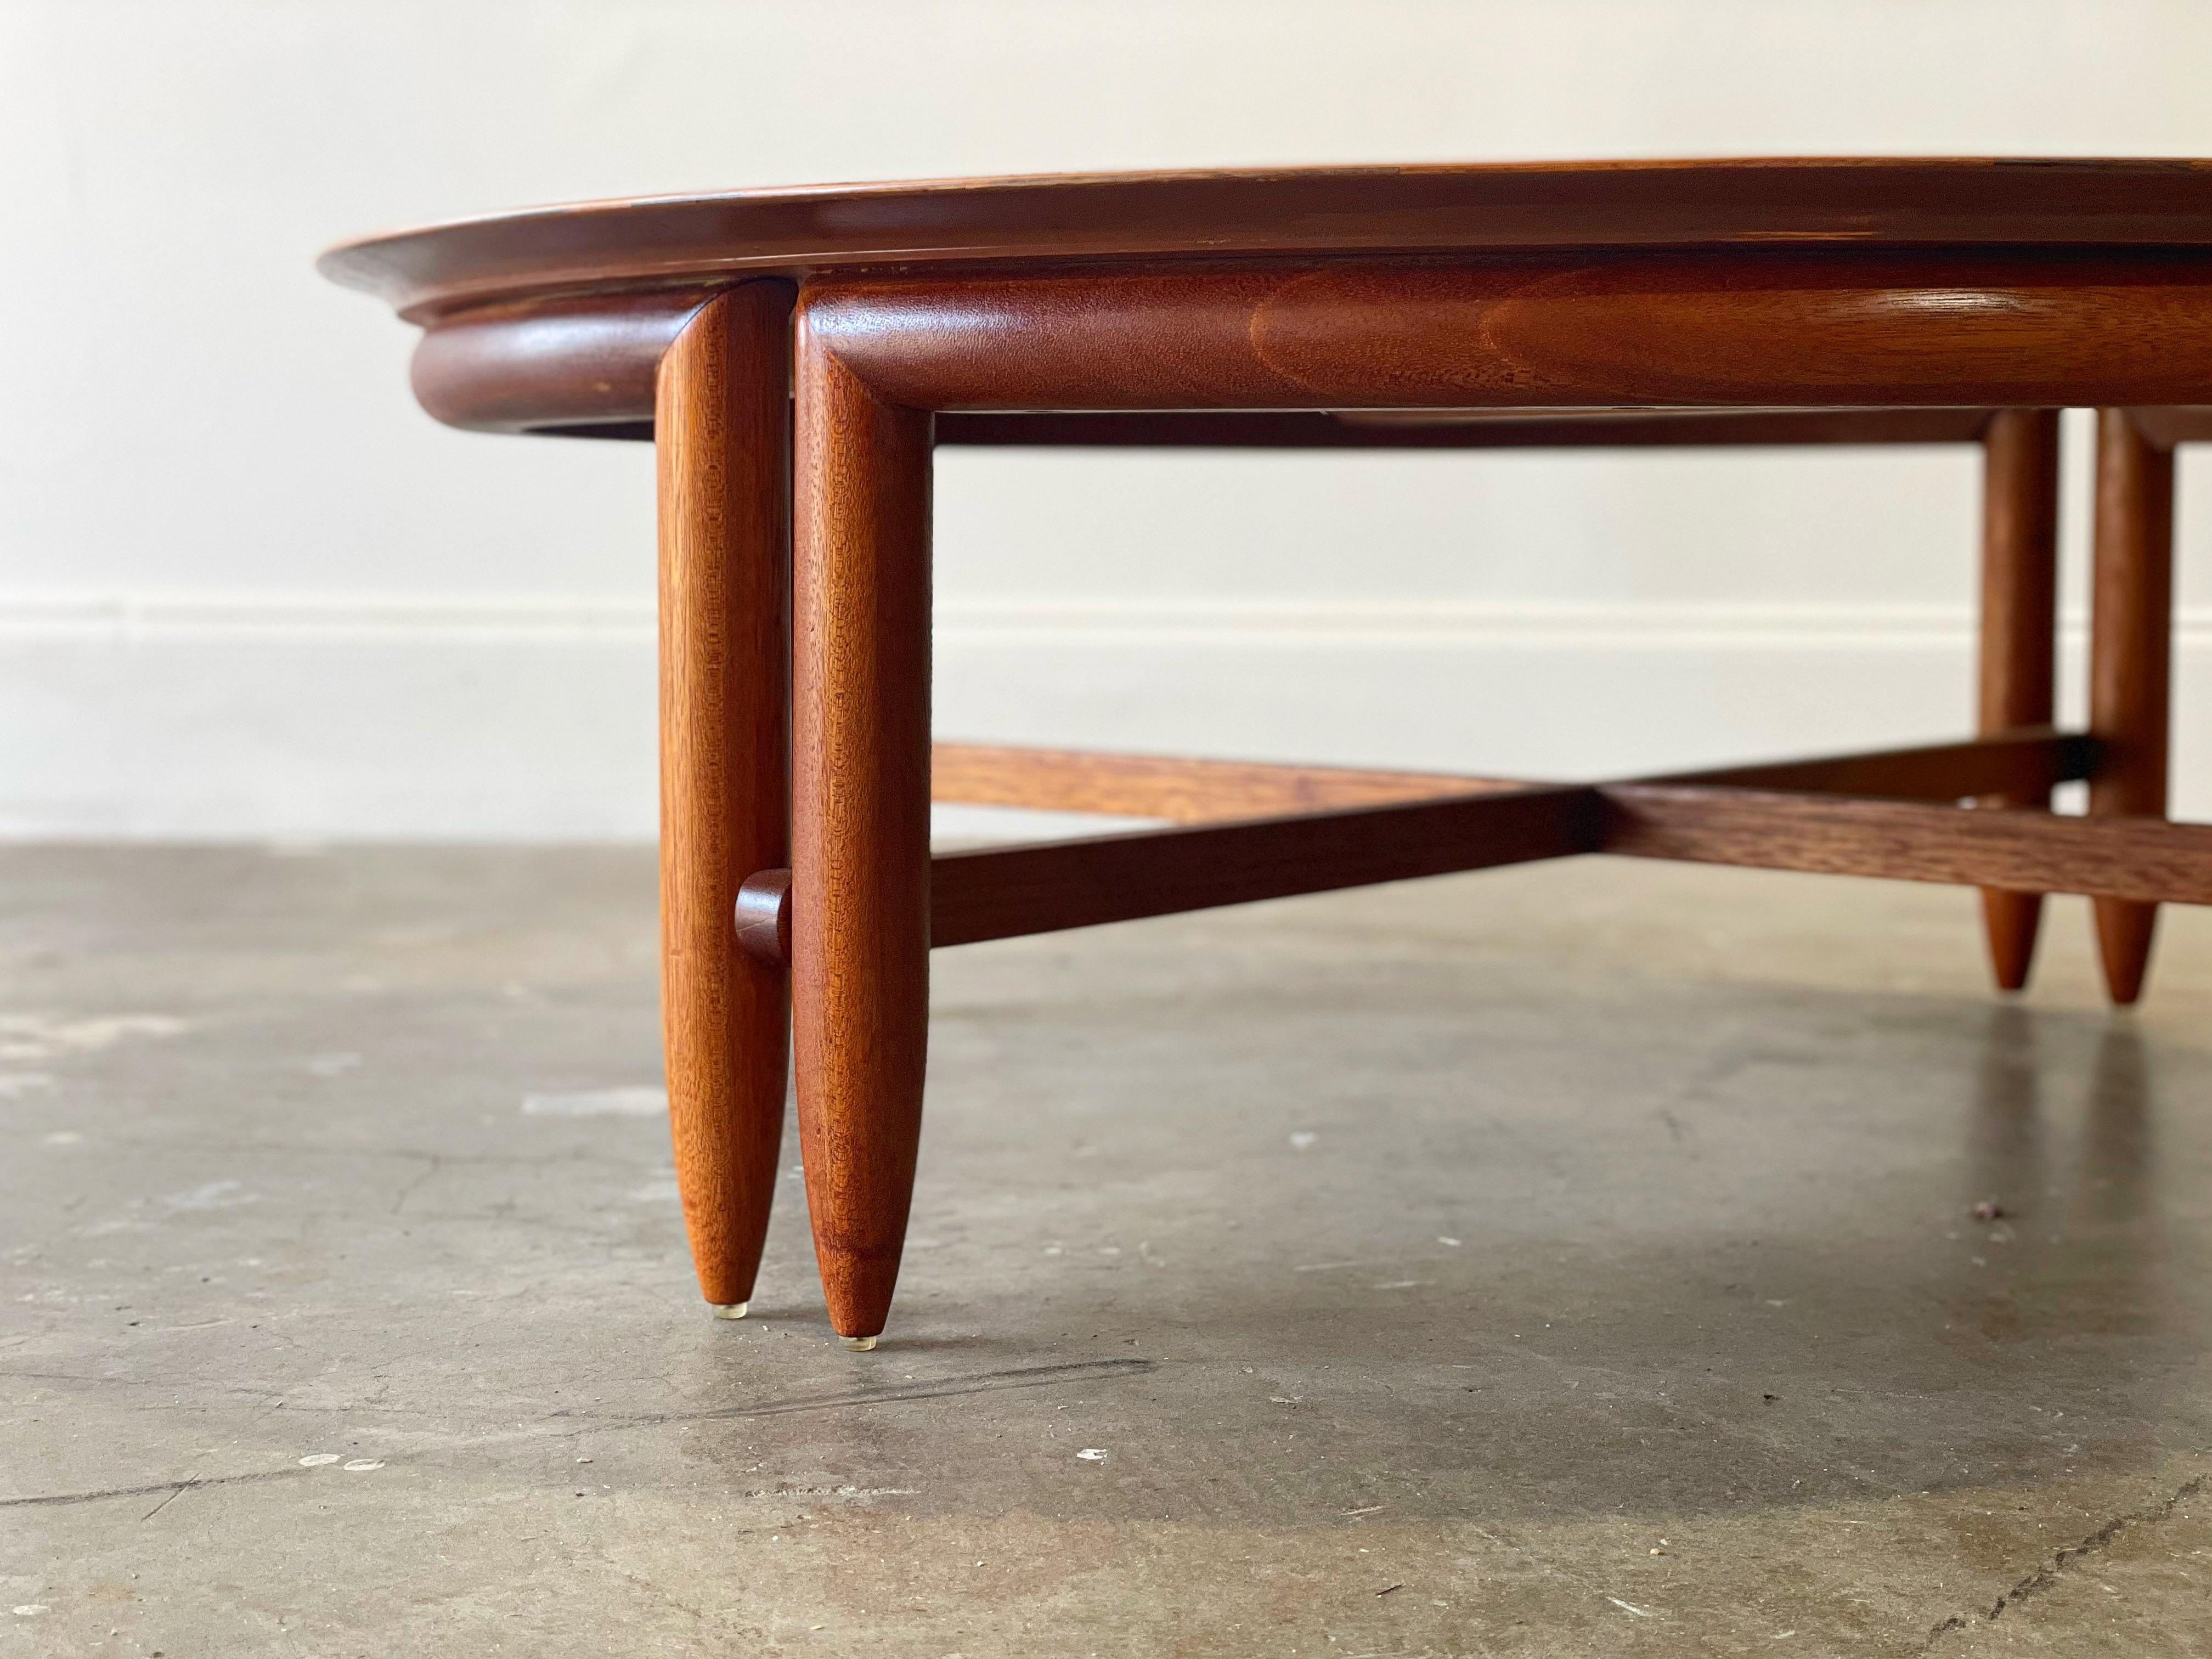 Rare torpedo leg round cocktail designed by John Keal for Brown Saltman, circa early 1950s. This example is unique on the market - we have not been able to find any other documented examples of this particular design. Retains the original 